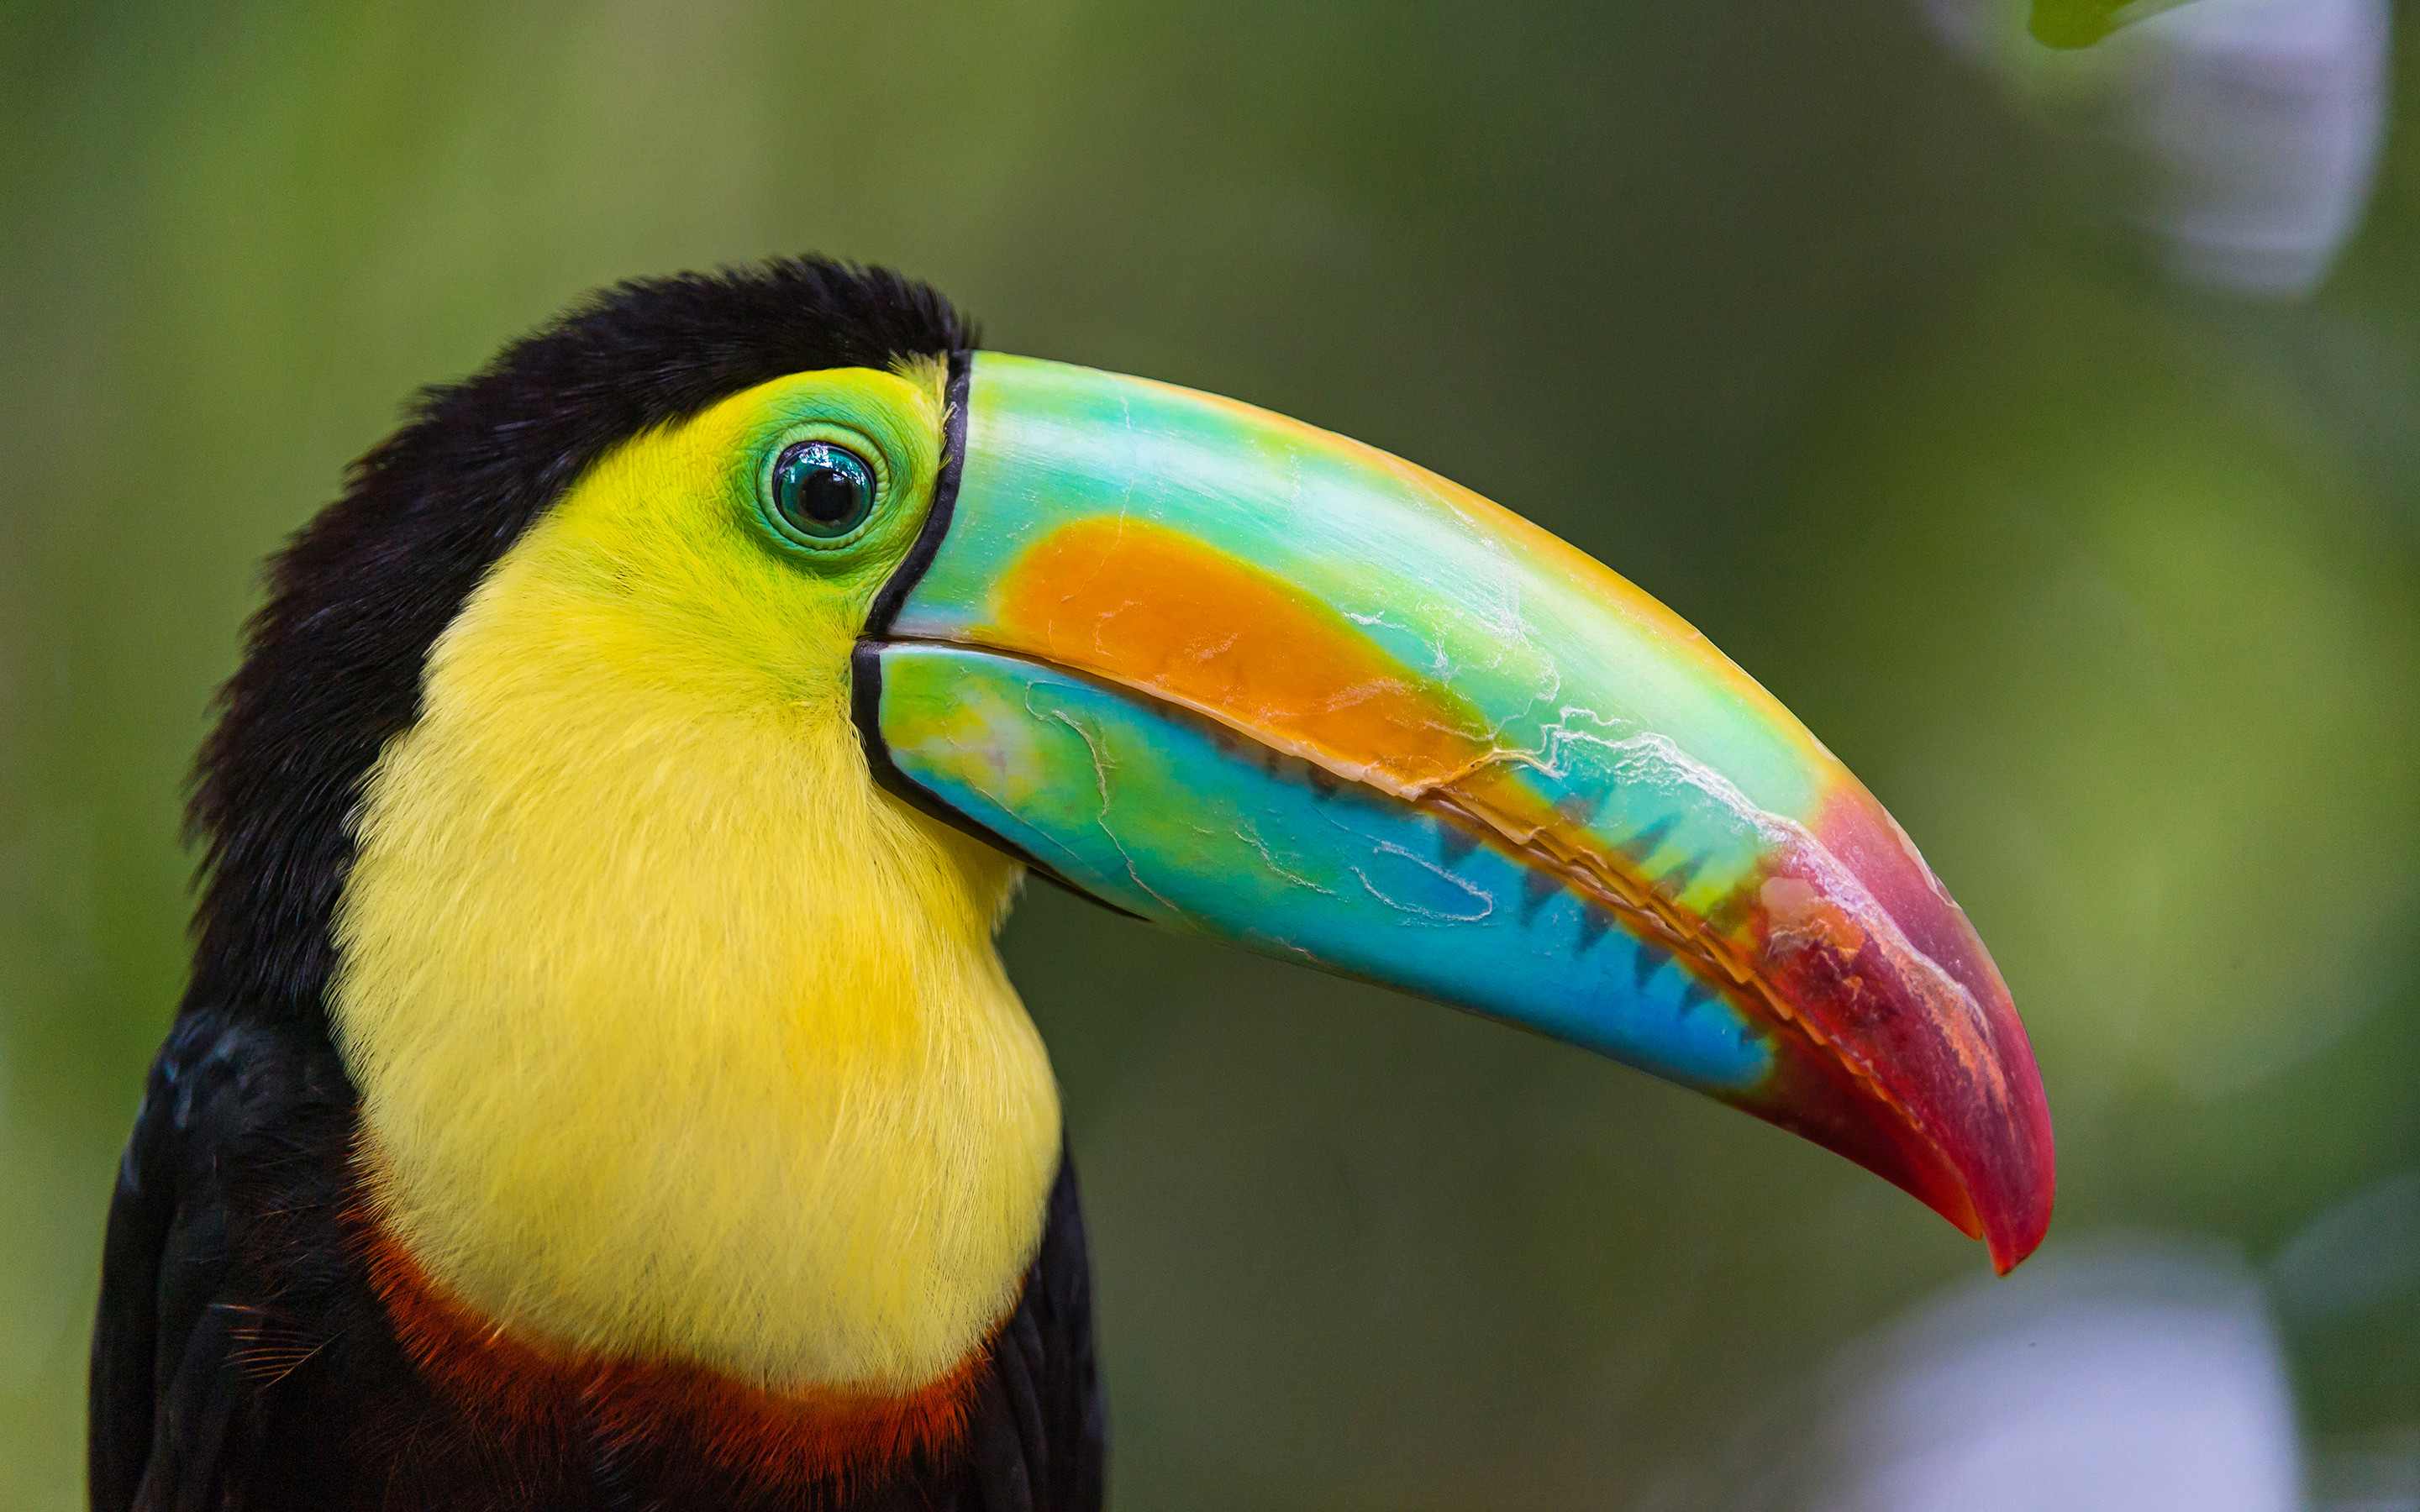 Toucan Bird Wallpaper For Wallpaper Mobile Phoneand Pc 842   Wallpapers13com